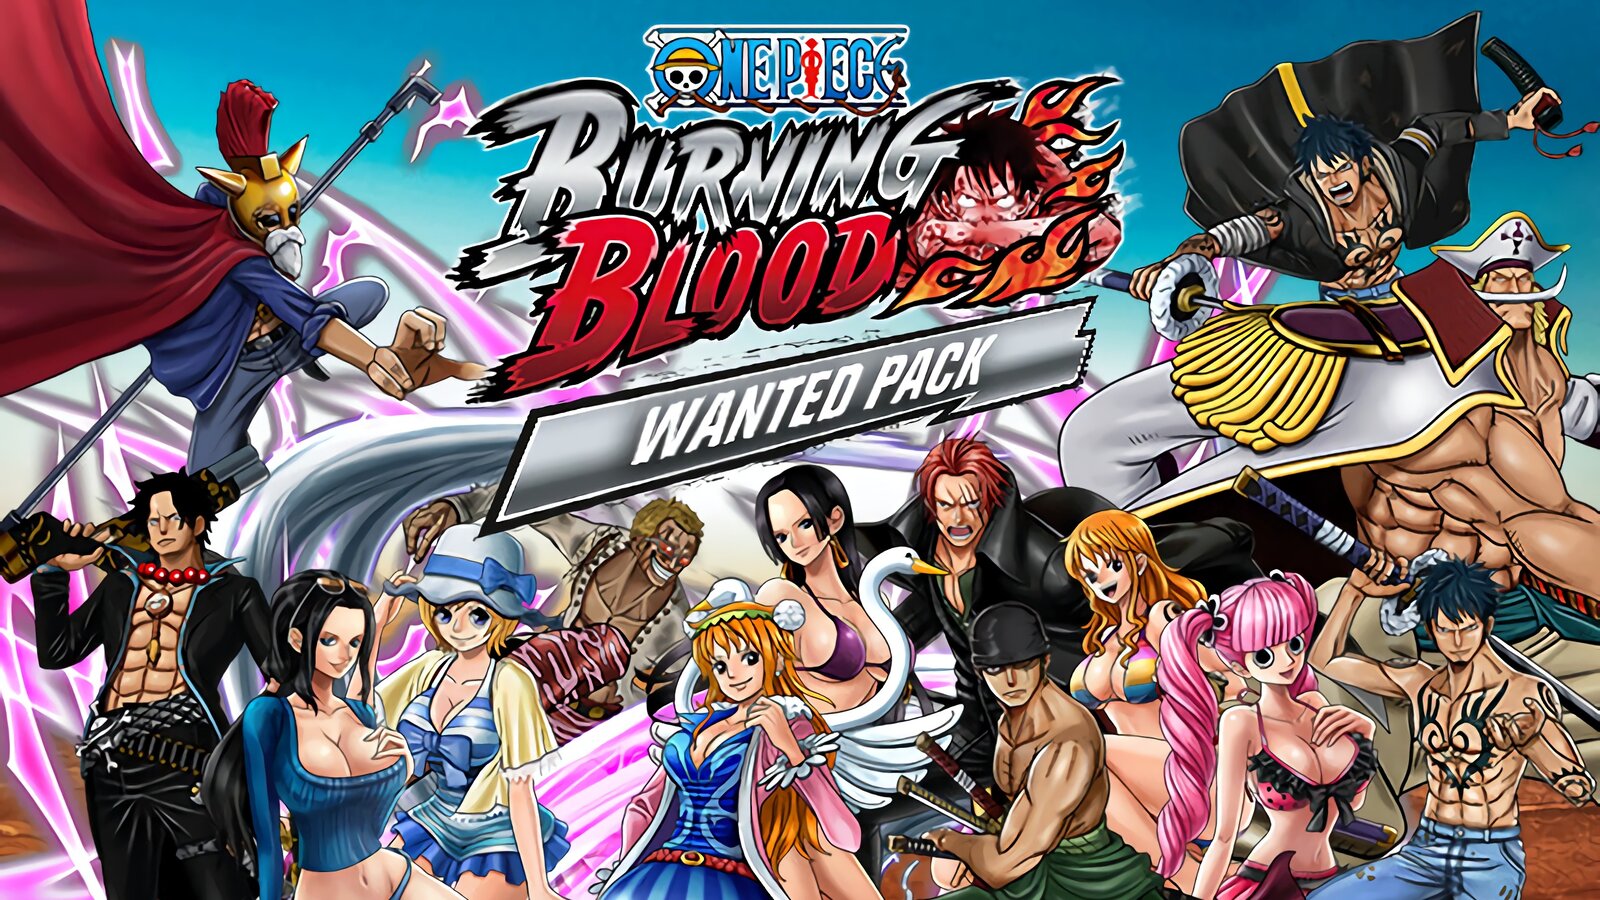 One Piece Burning Blood - Wanted Pack